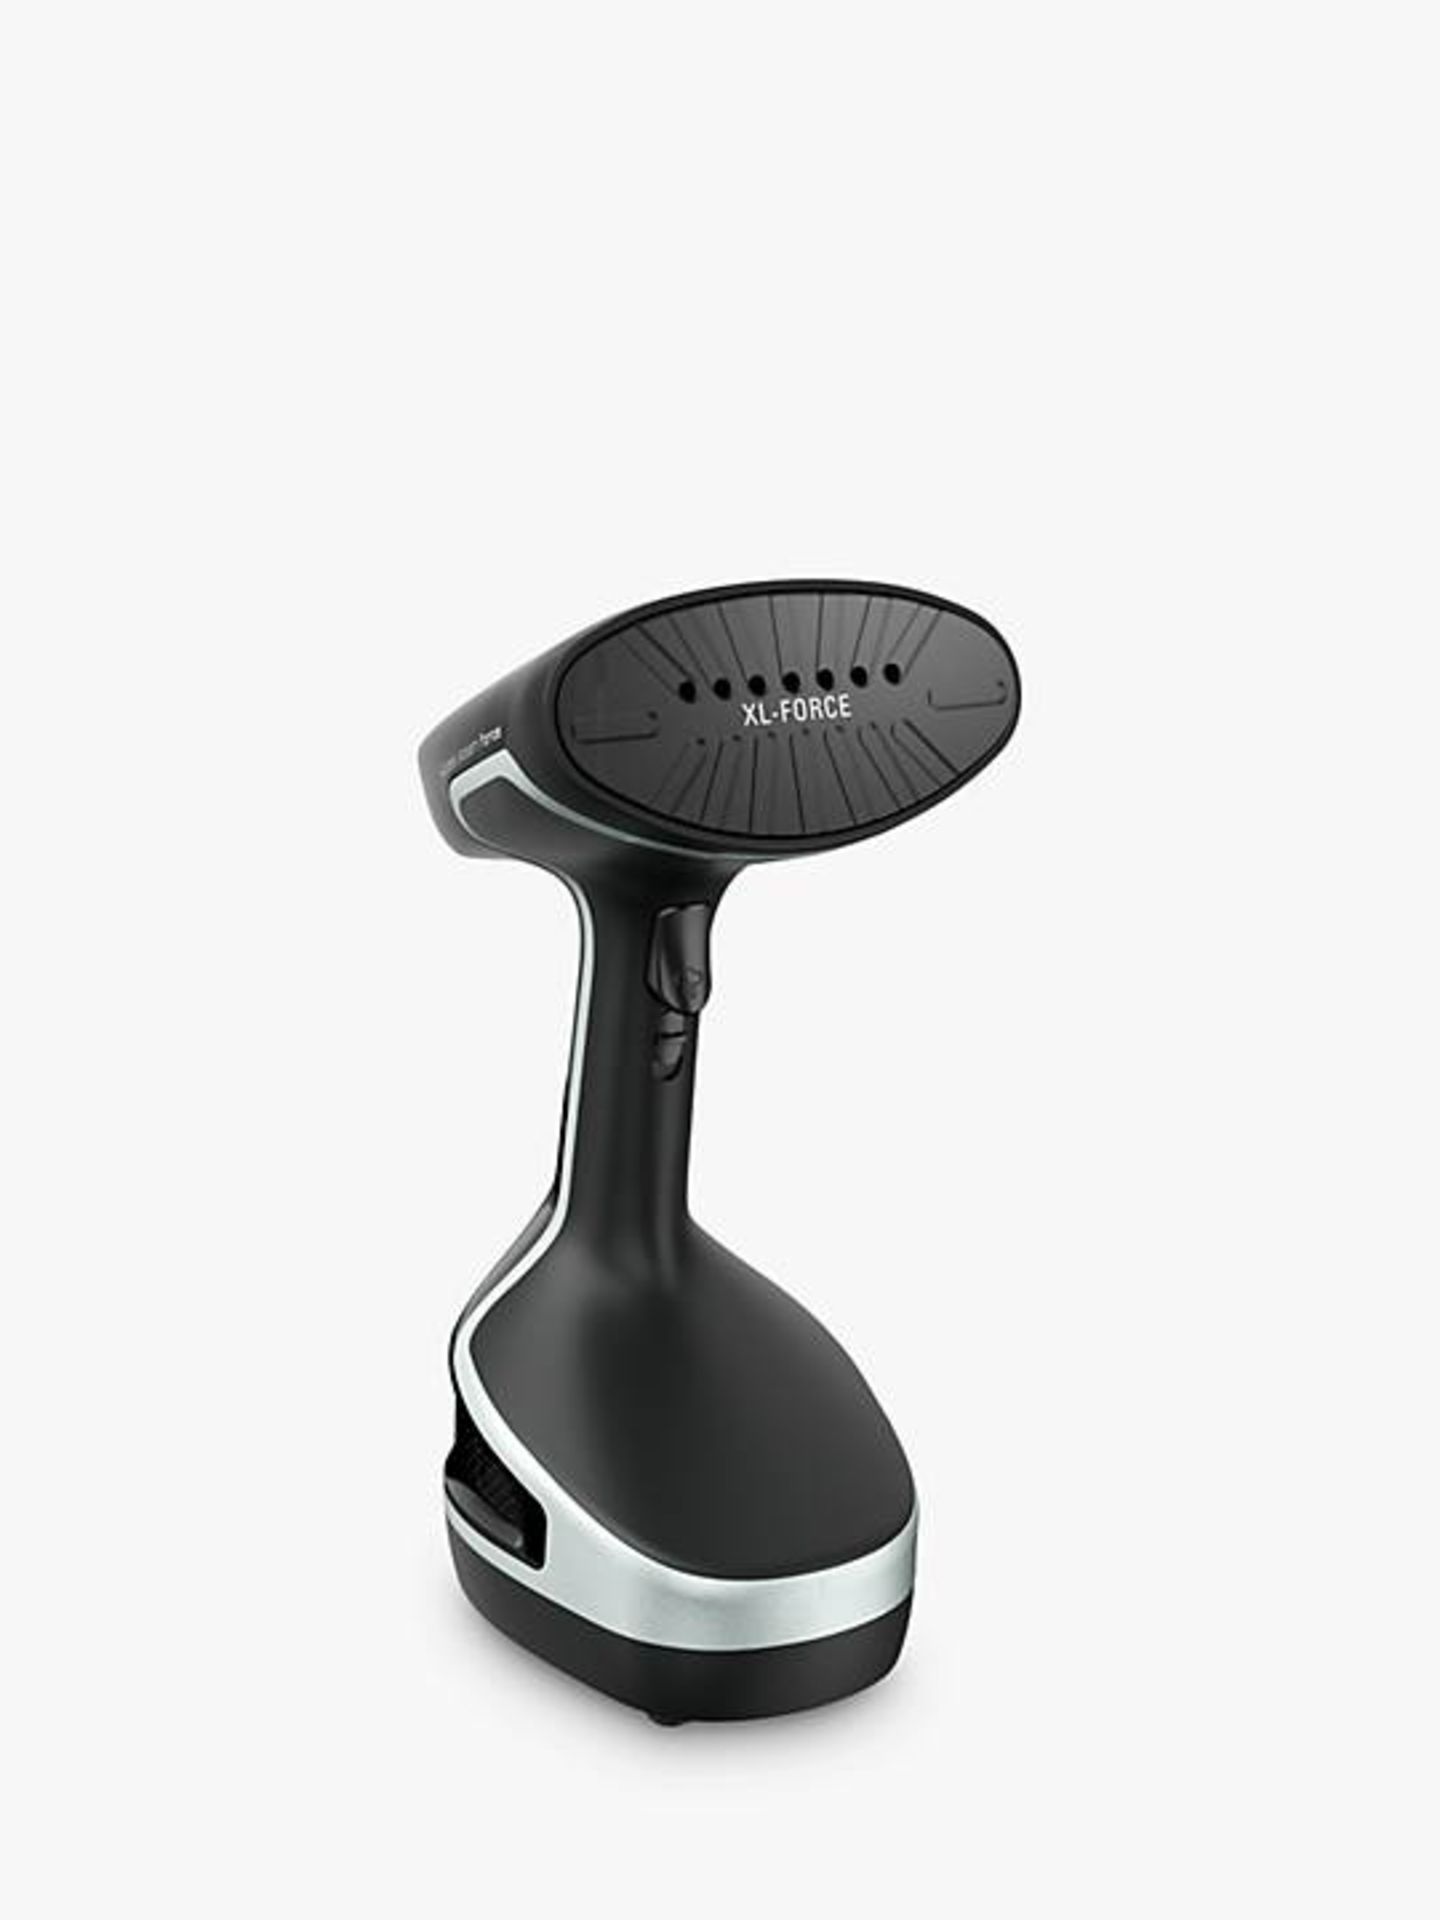 Tefal Access Steam Force Handheld Clothes Steamer, 200ml, Black/Silver RRP £64.99